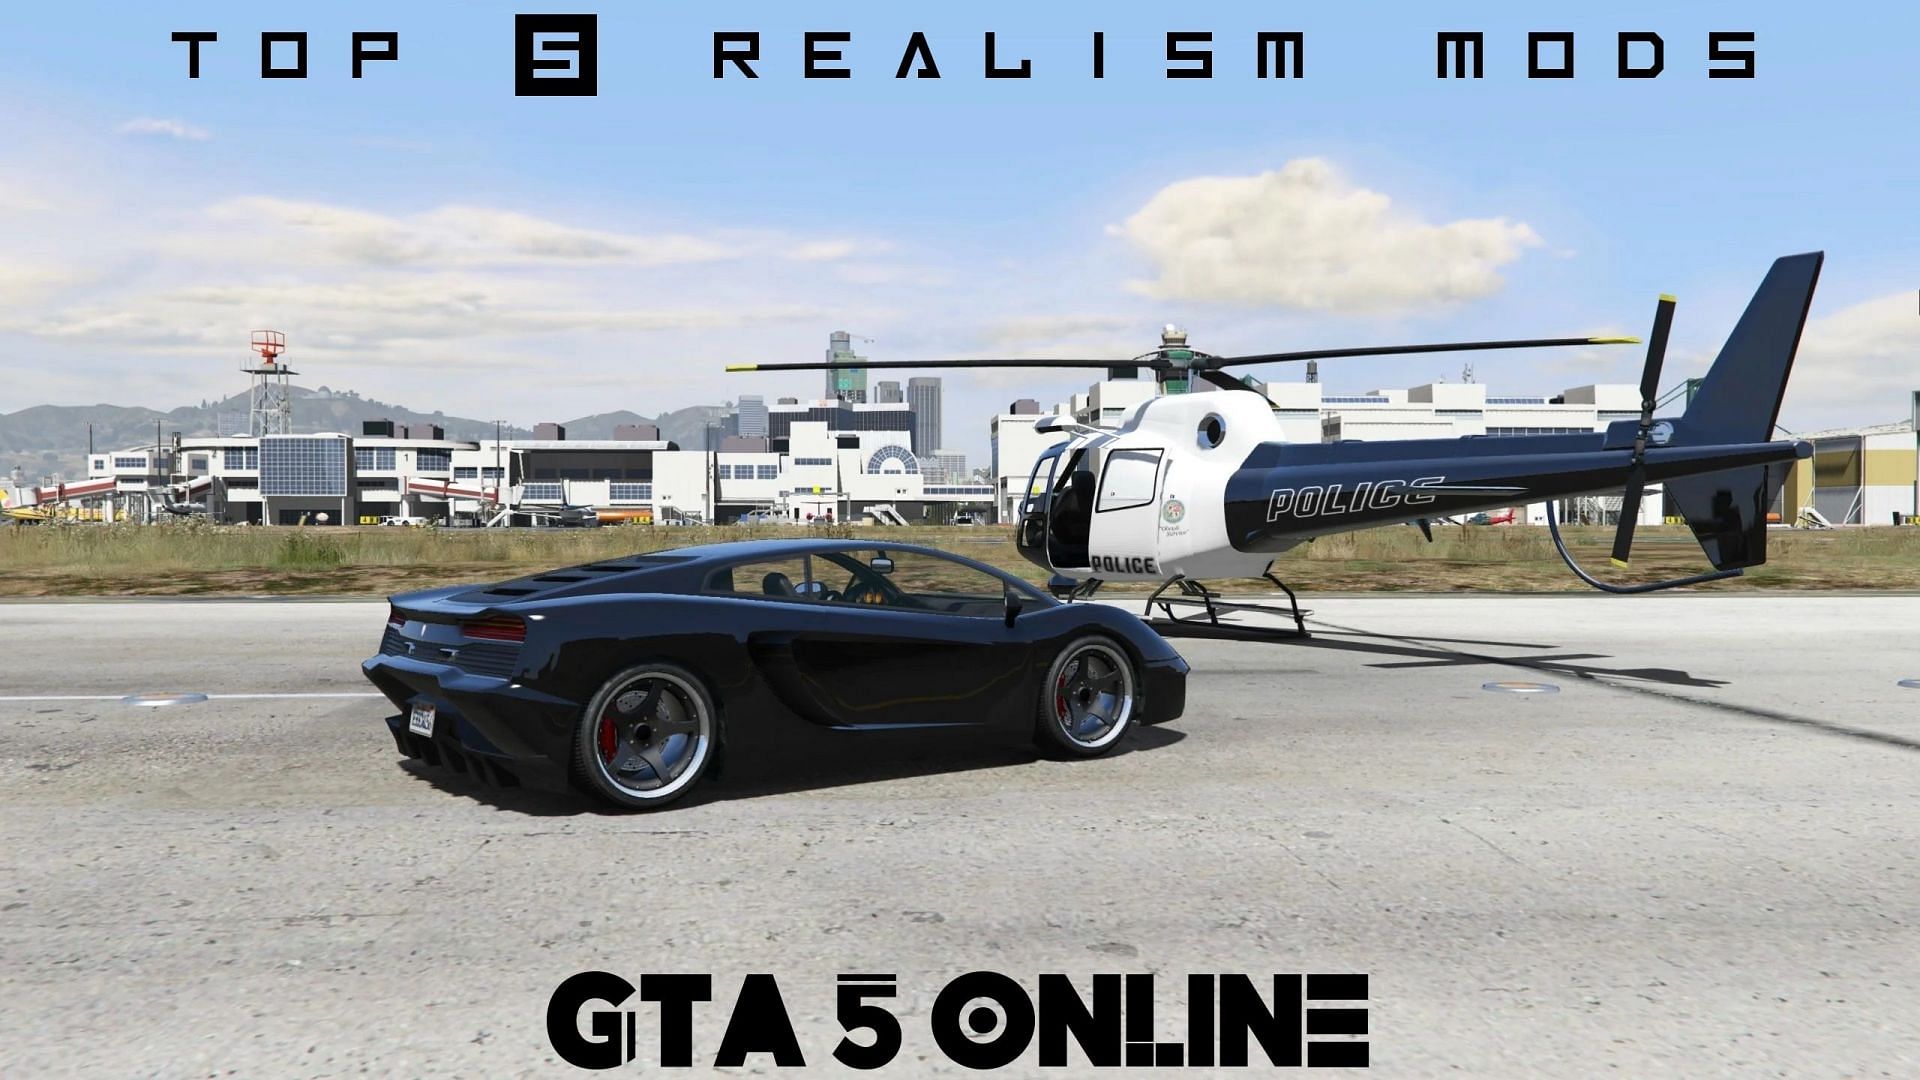 Gta 5 Must Have Realism Mods Ranked